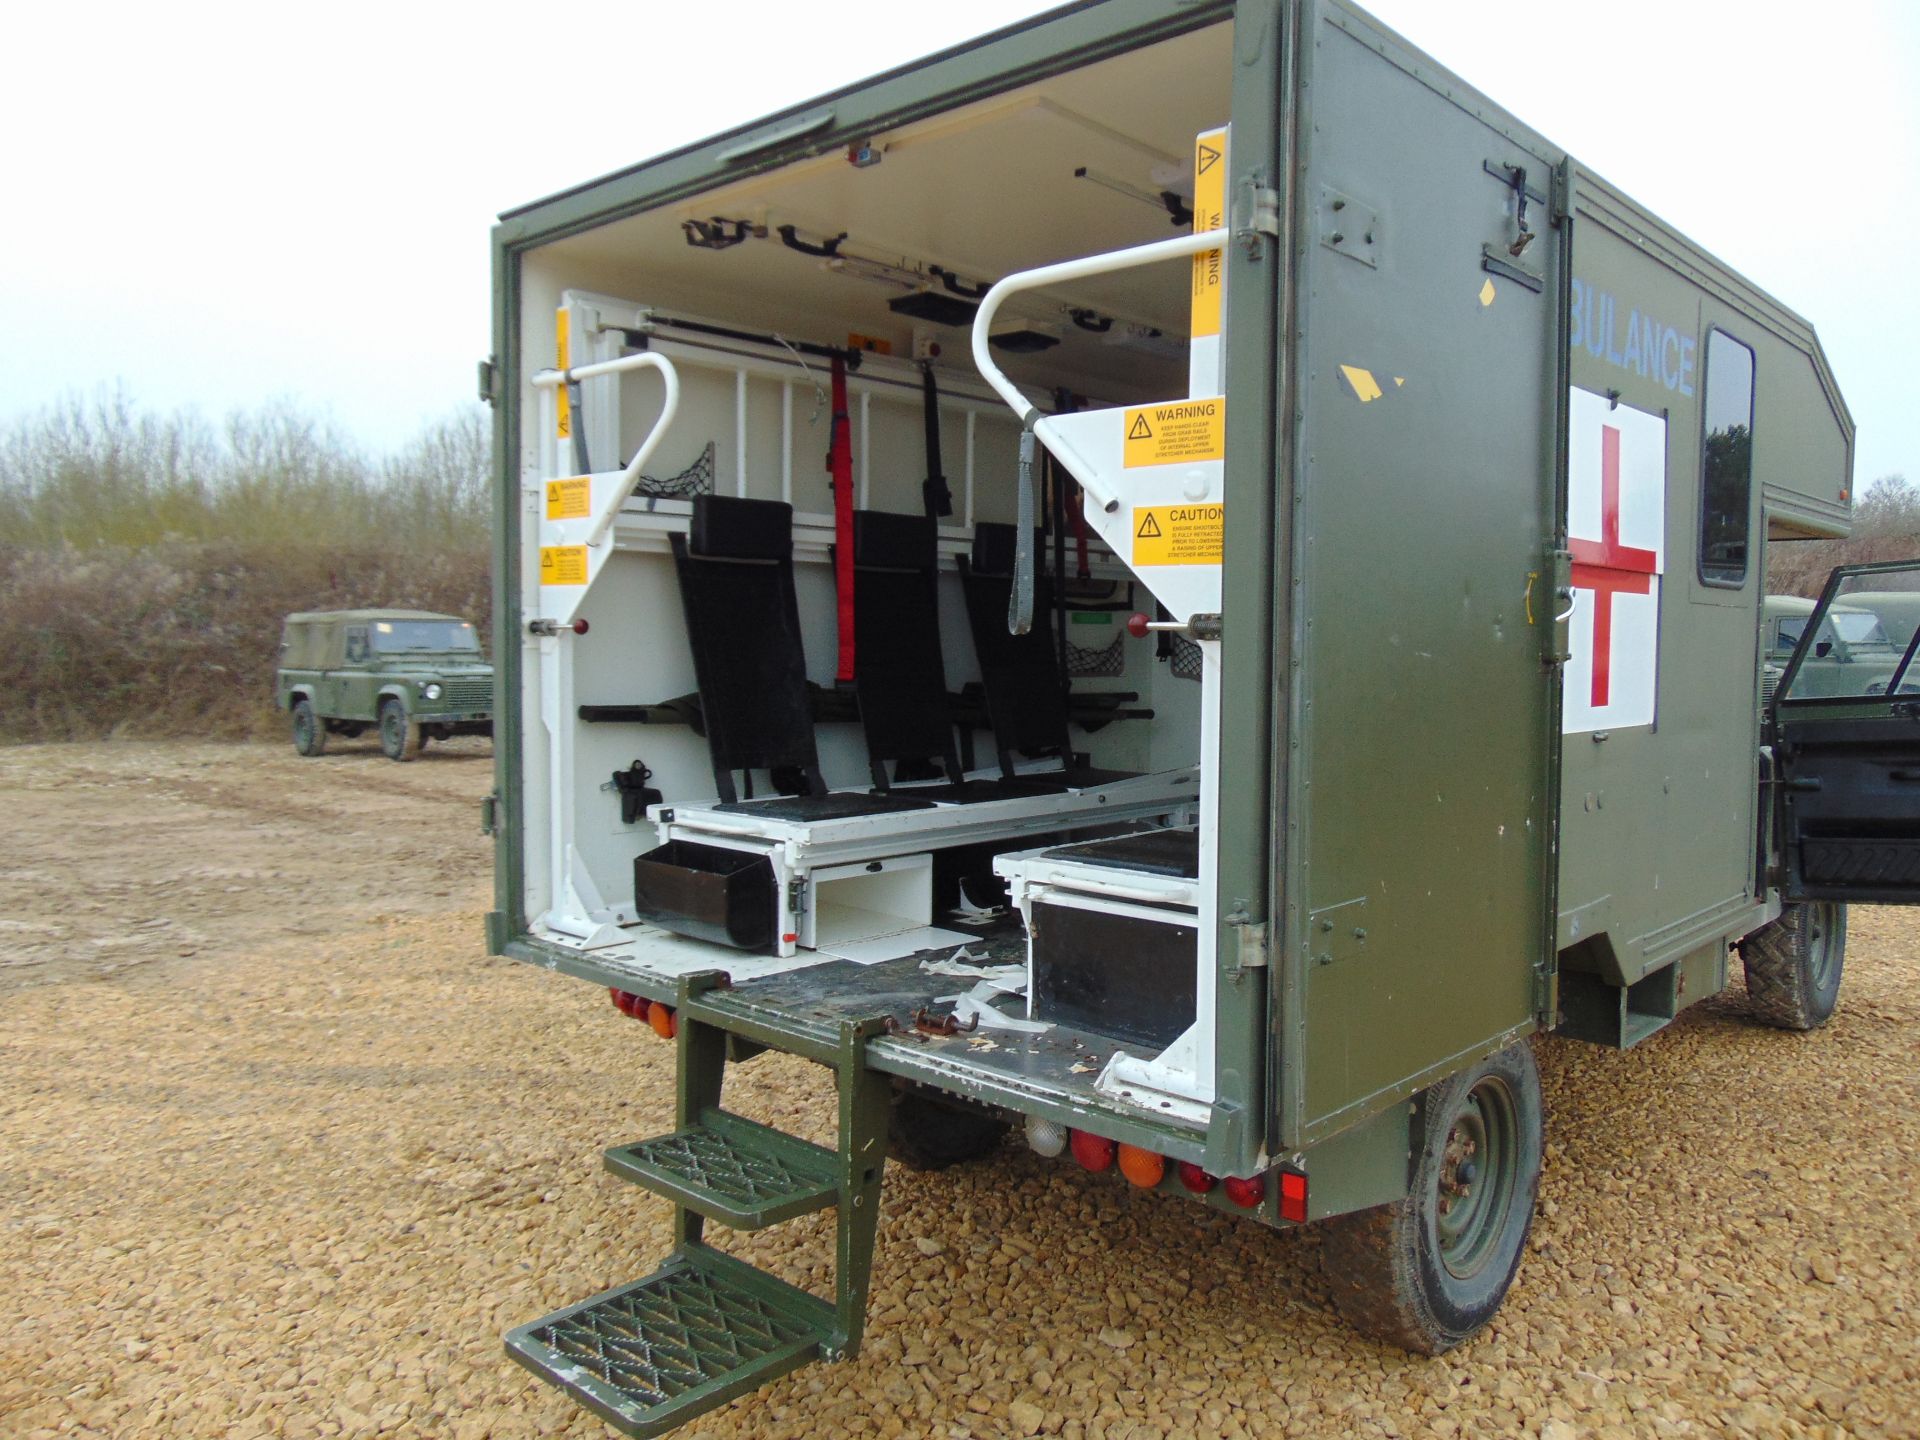 Military Specification Land Rover Wolf 130 ambulance - Image 12 of 19